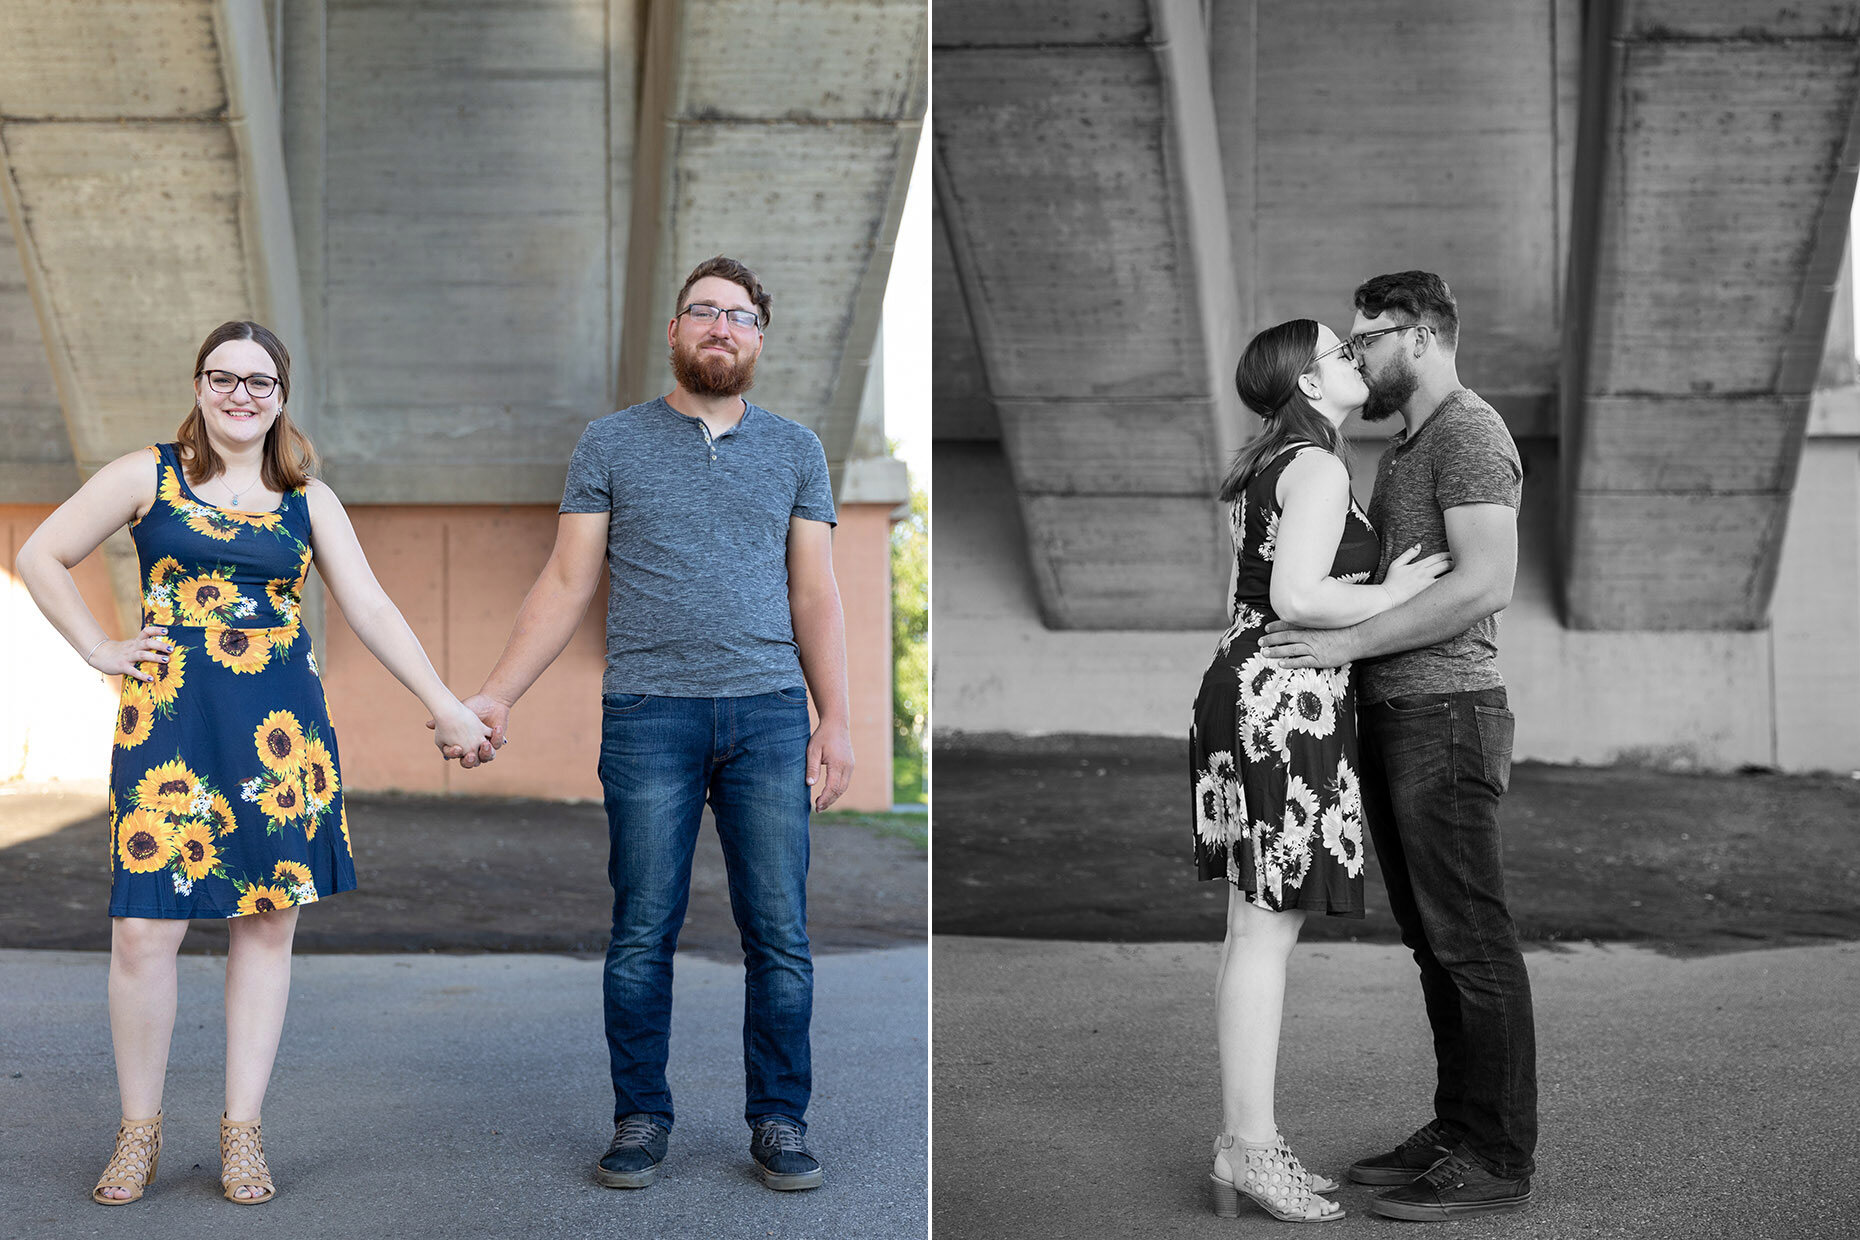  Columbia, PA, Engagement, Engaged, Photos, Portraits, Couple, Photography, Photographer, Lancaster County, PA, Lancaster, PA, Wedding, Weddings, Wedding Photographer, Central, PA, Pink, Wall, Sunflower, Dress, Underneath a bridge, black and white, h